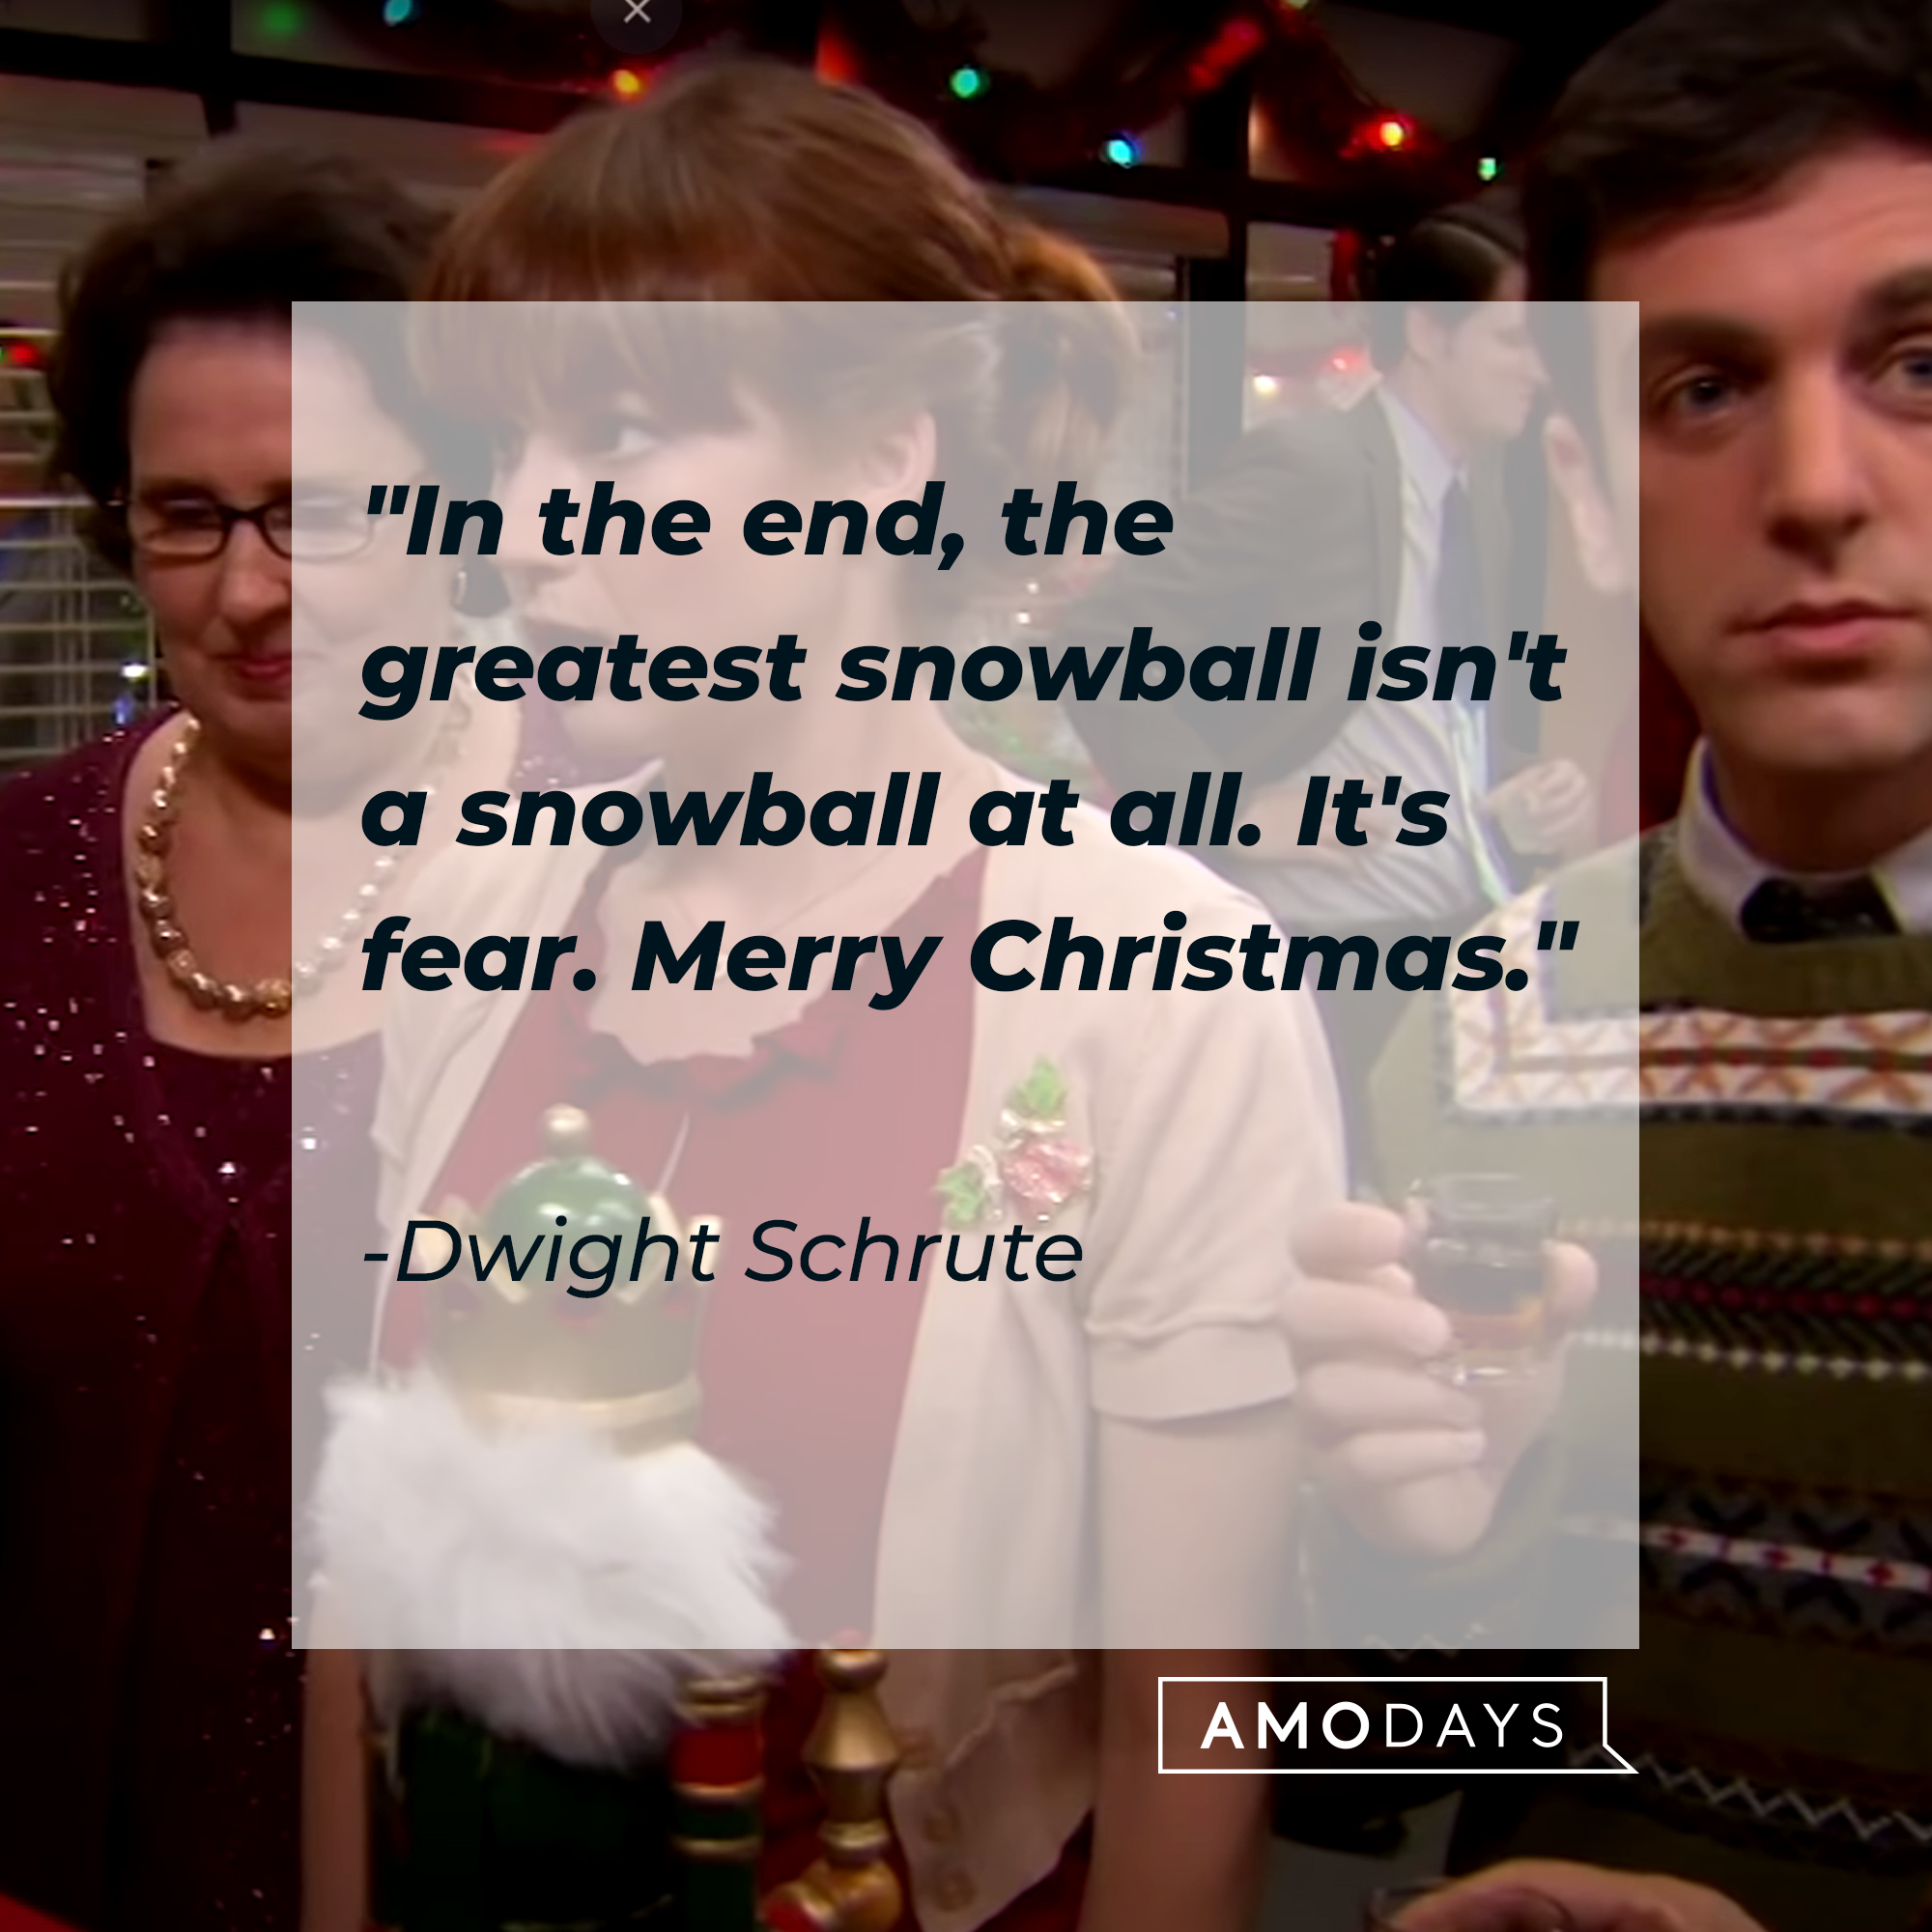 Dwight Schrute’s quote: "In the end, the greatest snowball isn't a snowball at all. It's fear. Merry Christmas." | Source: Youtube/TheOffice